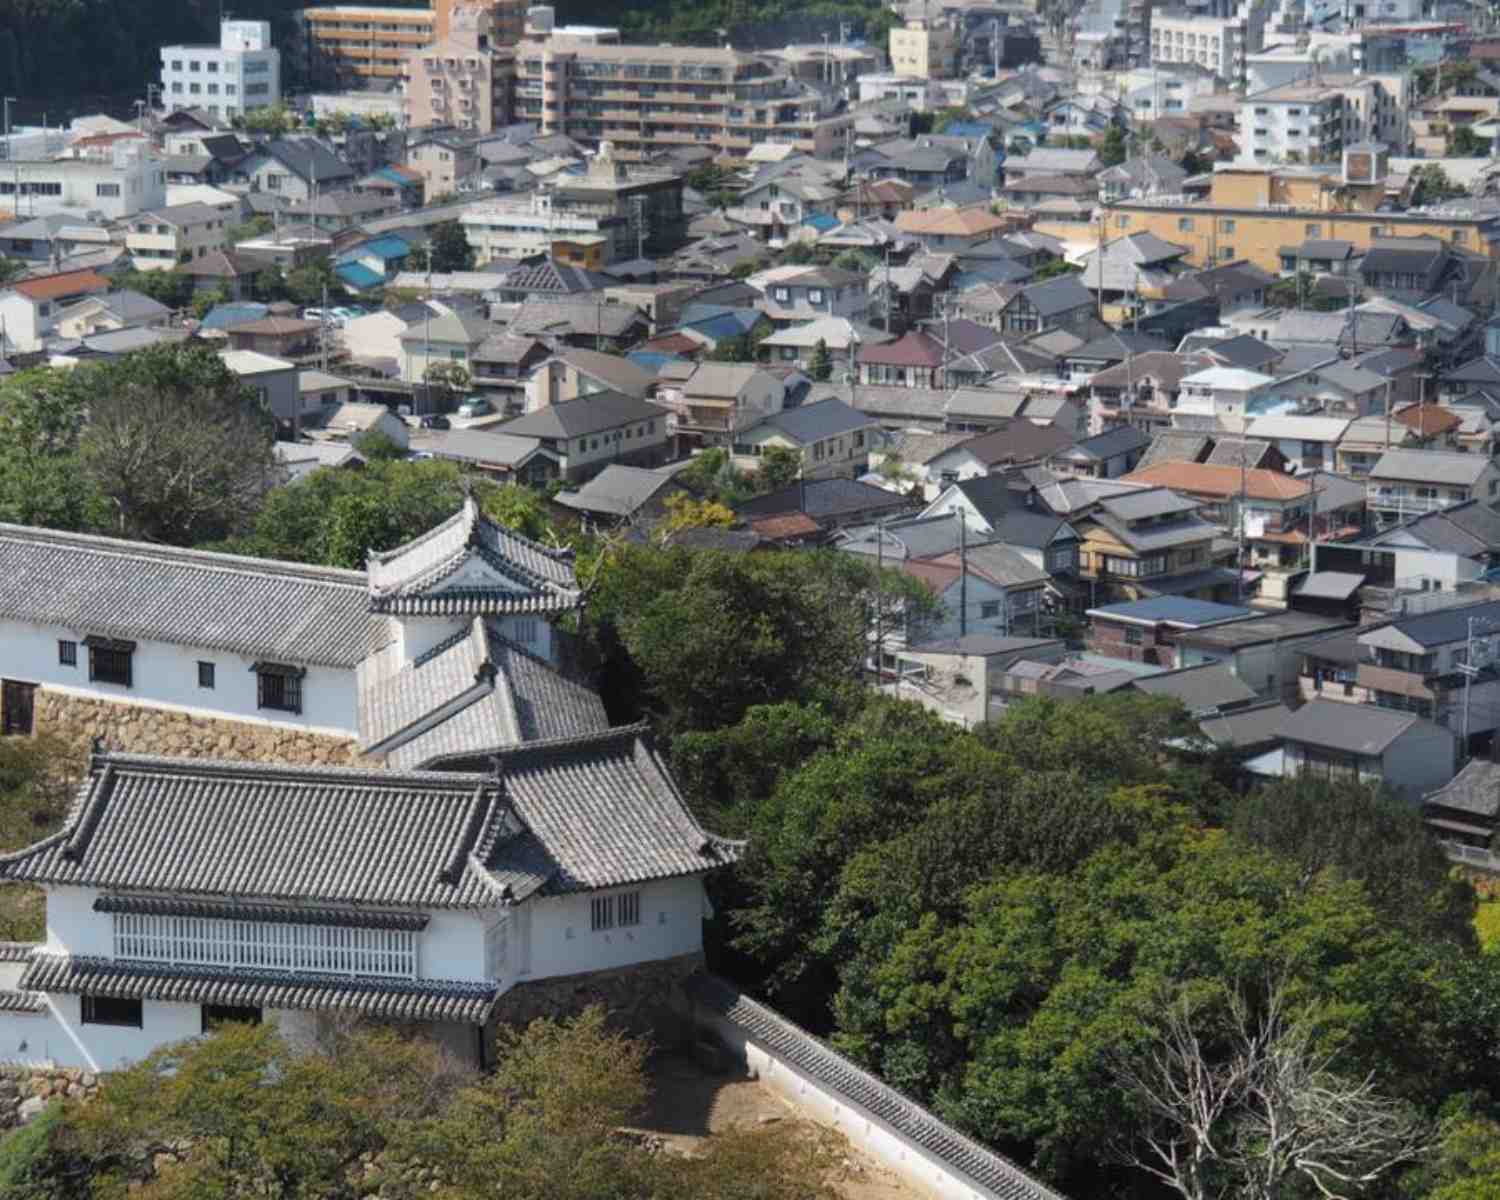 View from the top floor Himeji Castle